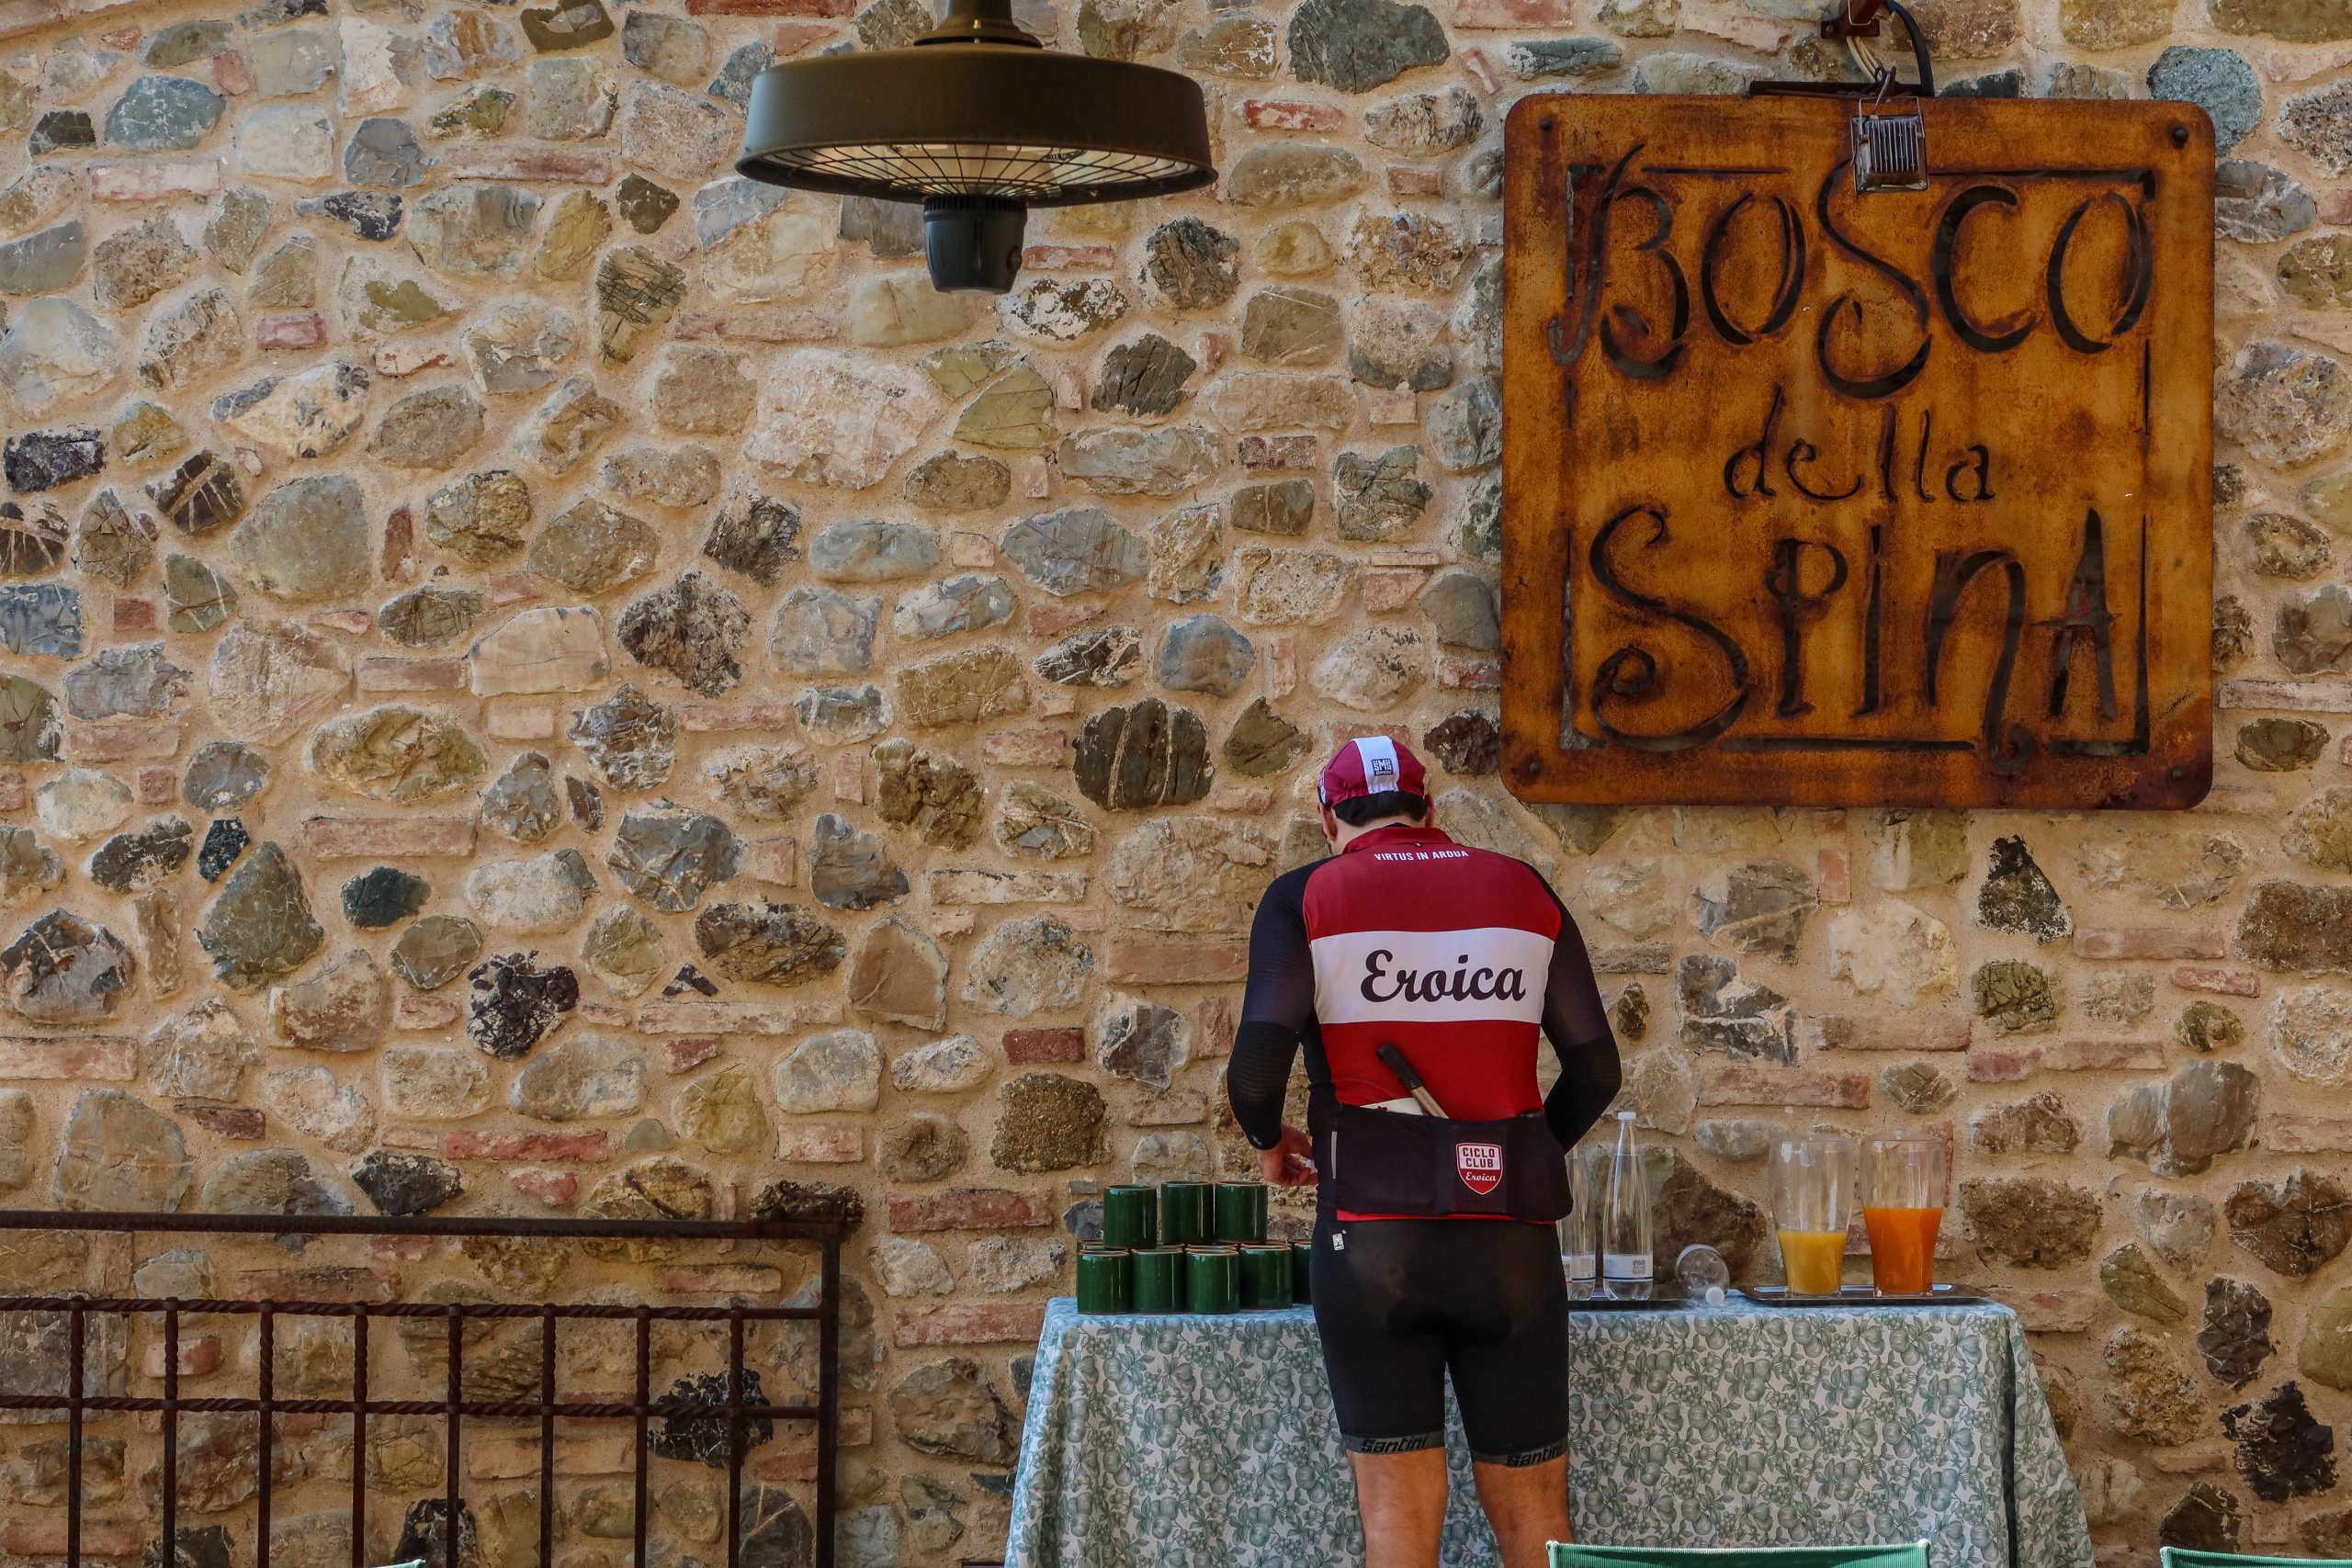 With Terra Eroica, the province of Siena becomes a cycling paradise